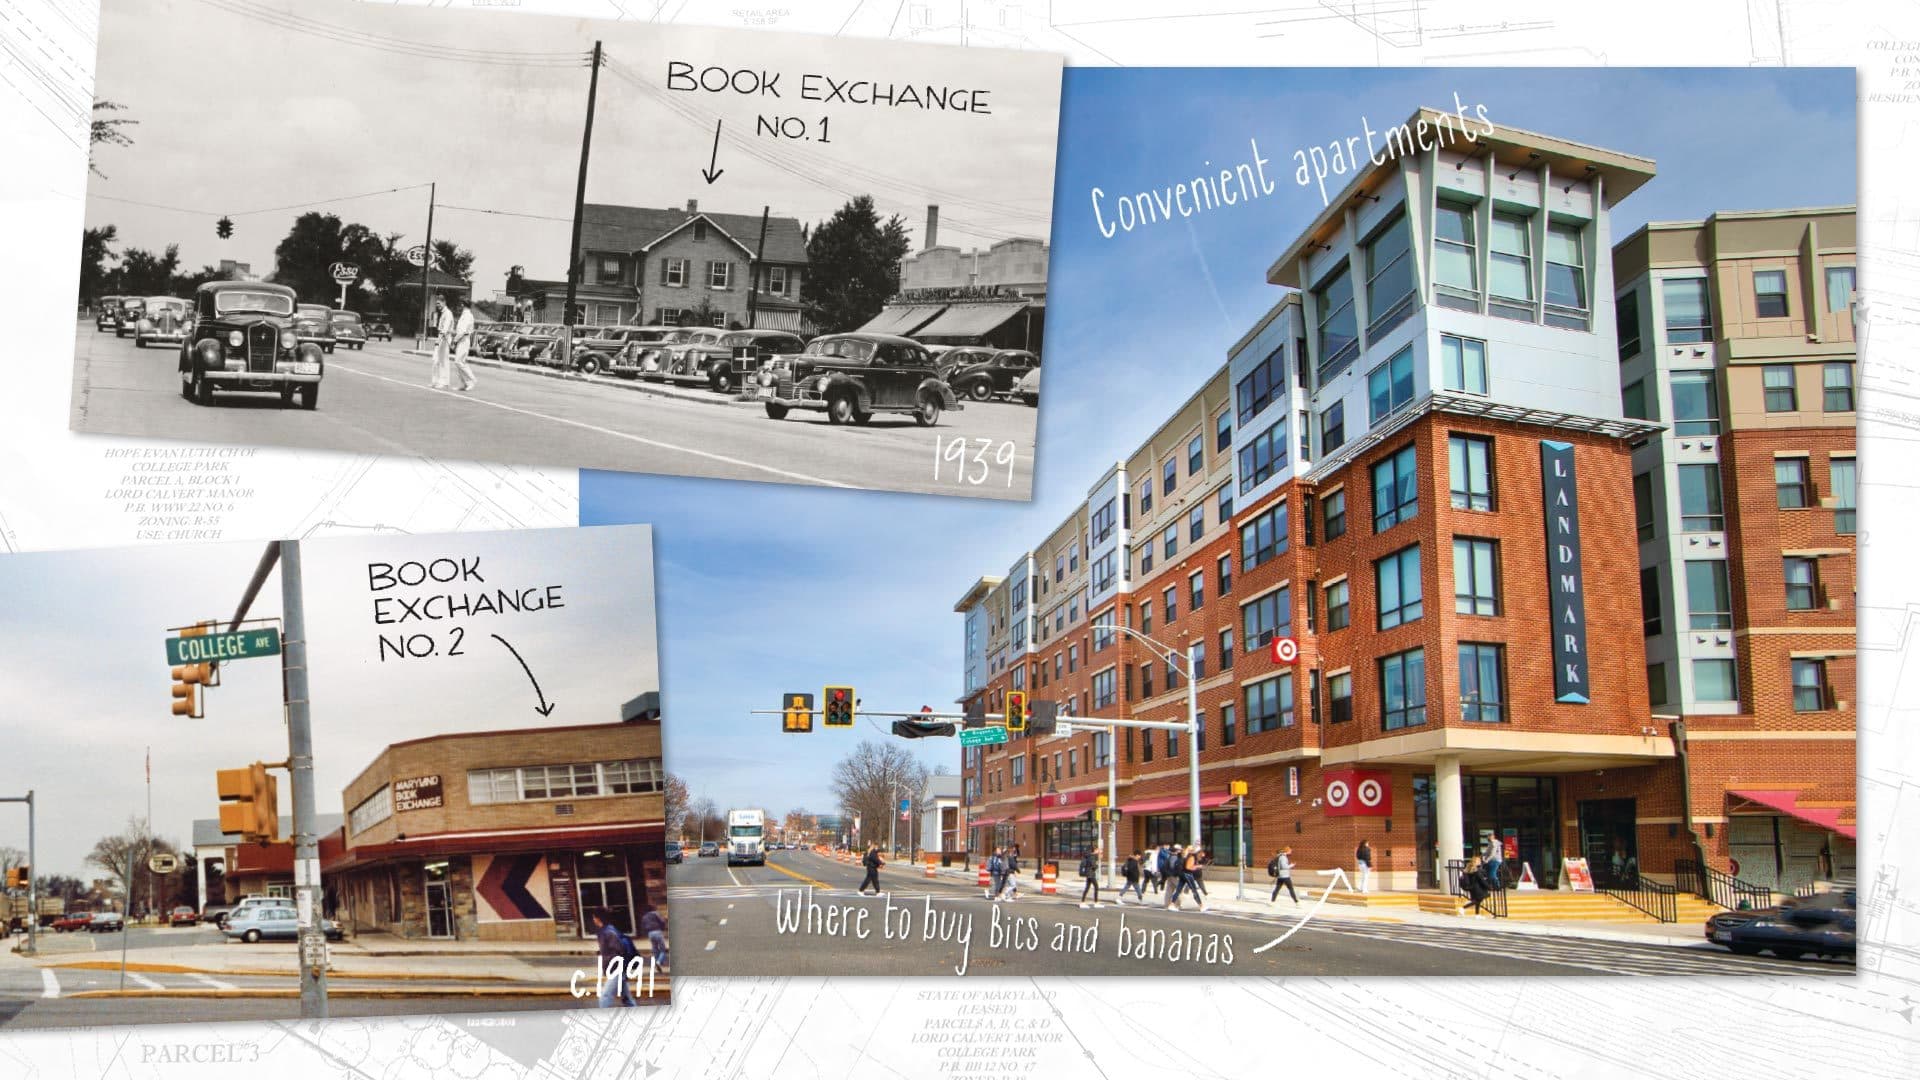 Collage showing archival photos of Book Exchange No. 1 and Book Exchange No. 2 with a contemporary photo of the Landmark Apartments: convenient apartments, where to buy Bics and bananas